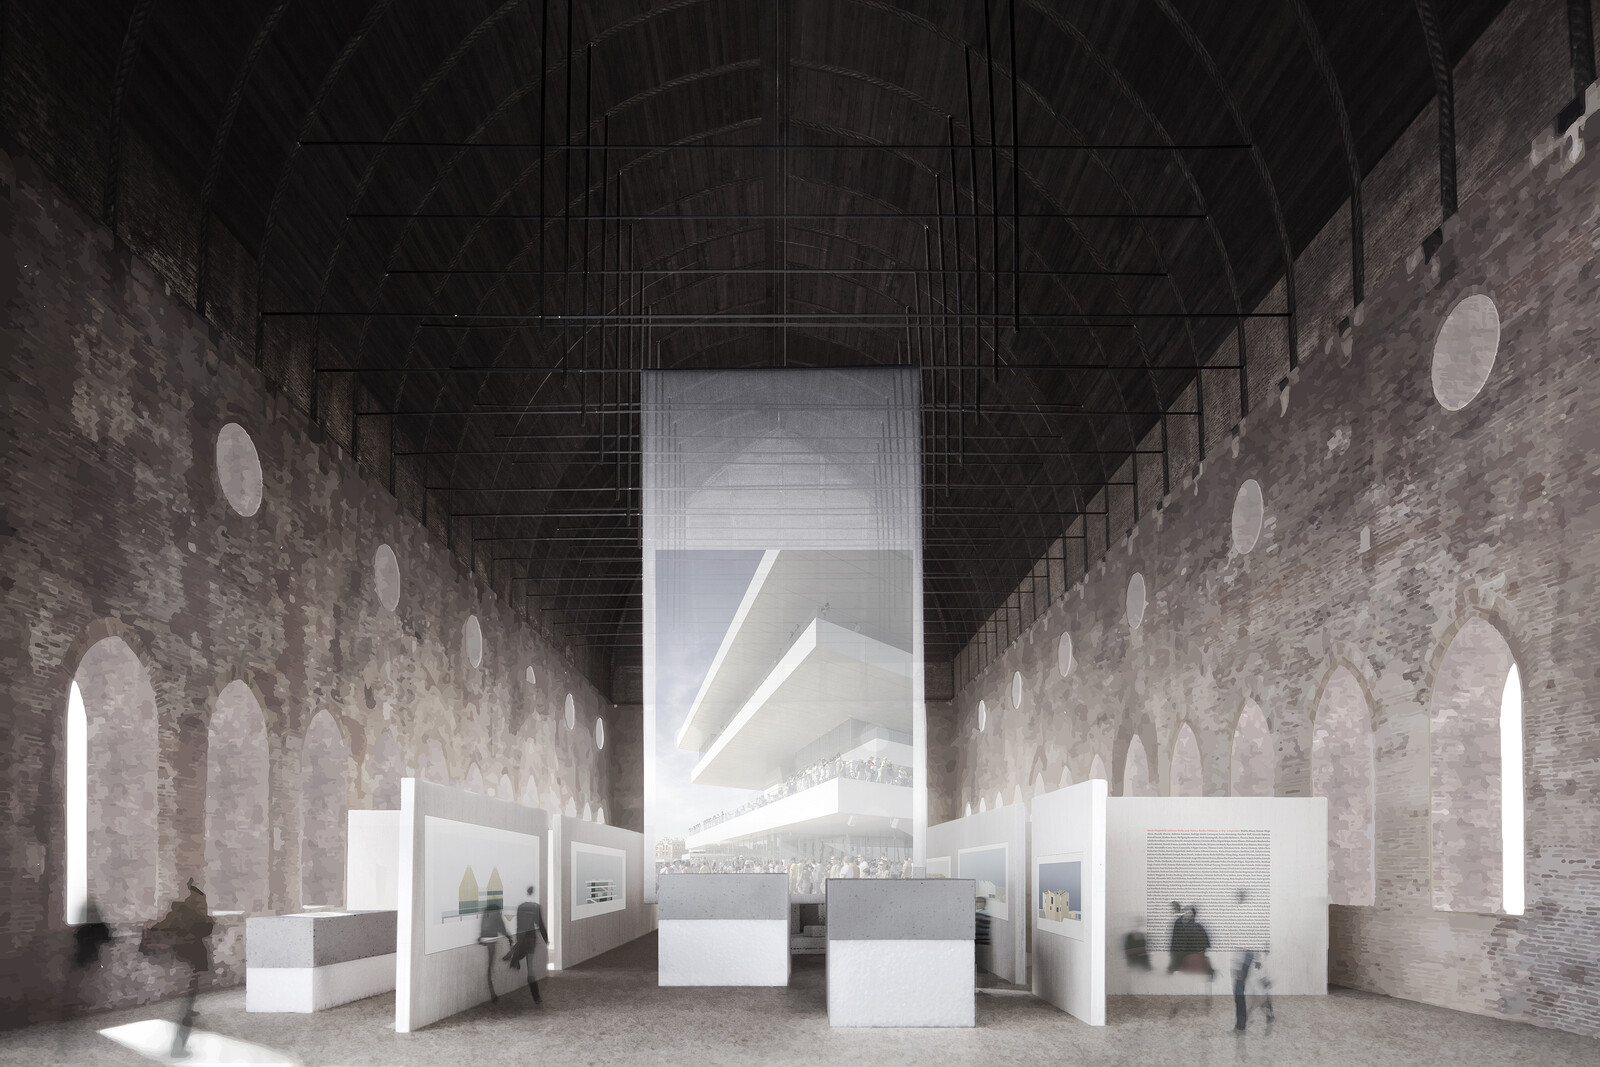 David Chipperfield Architects Works 2018 - Announcements - e-flux